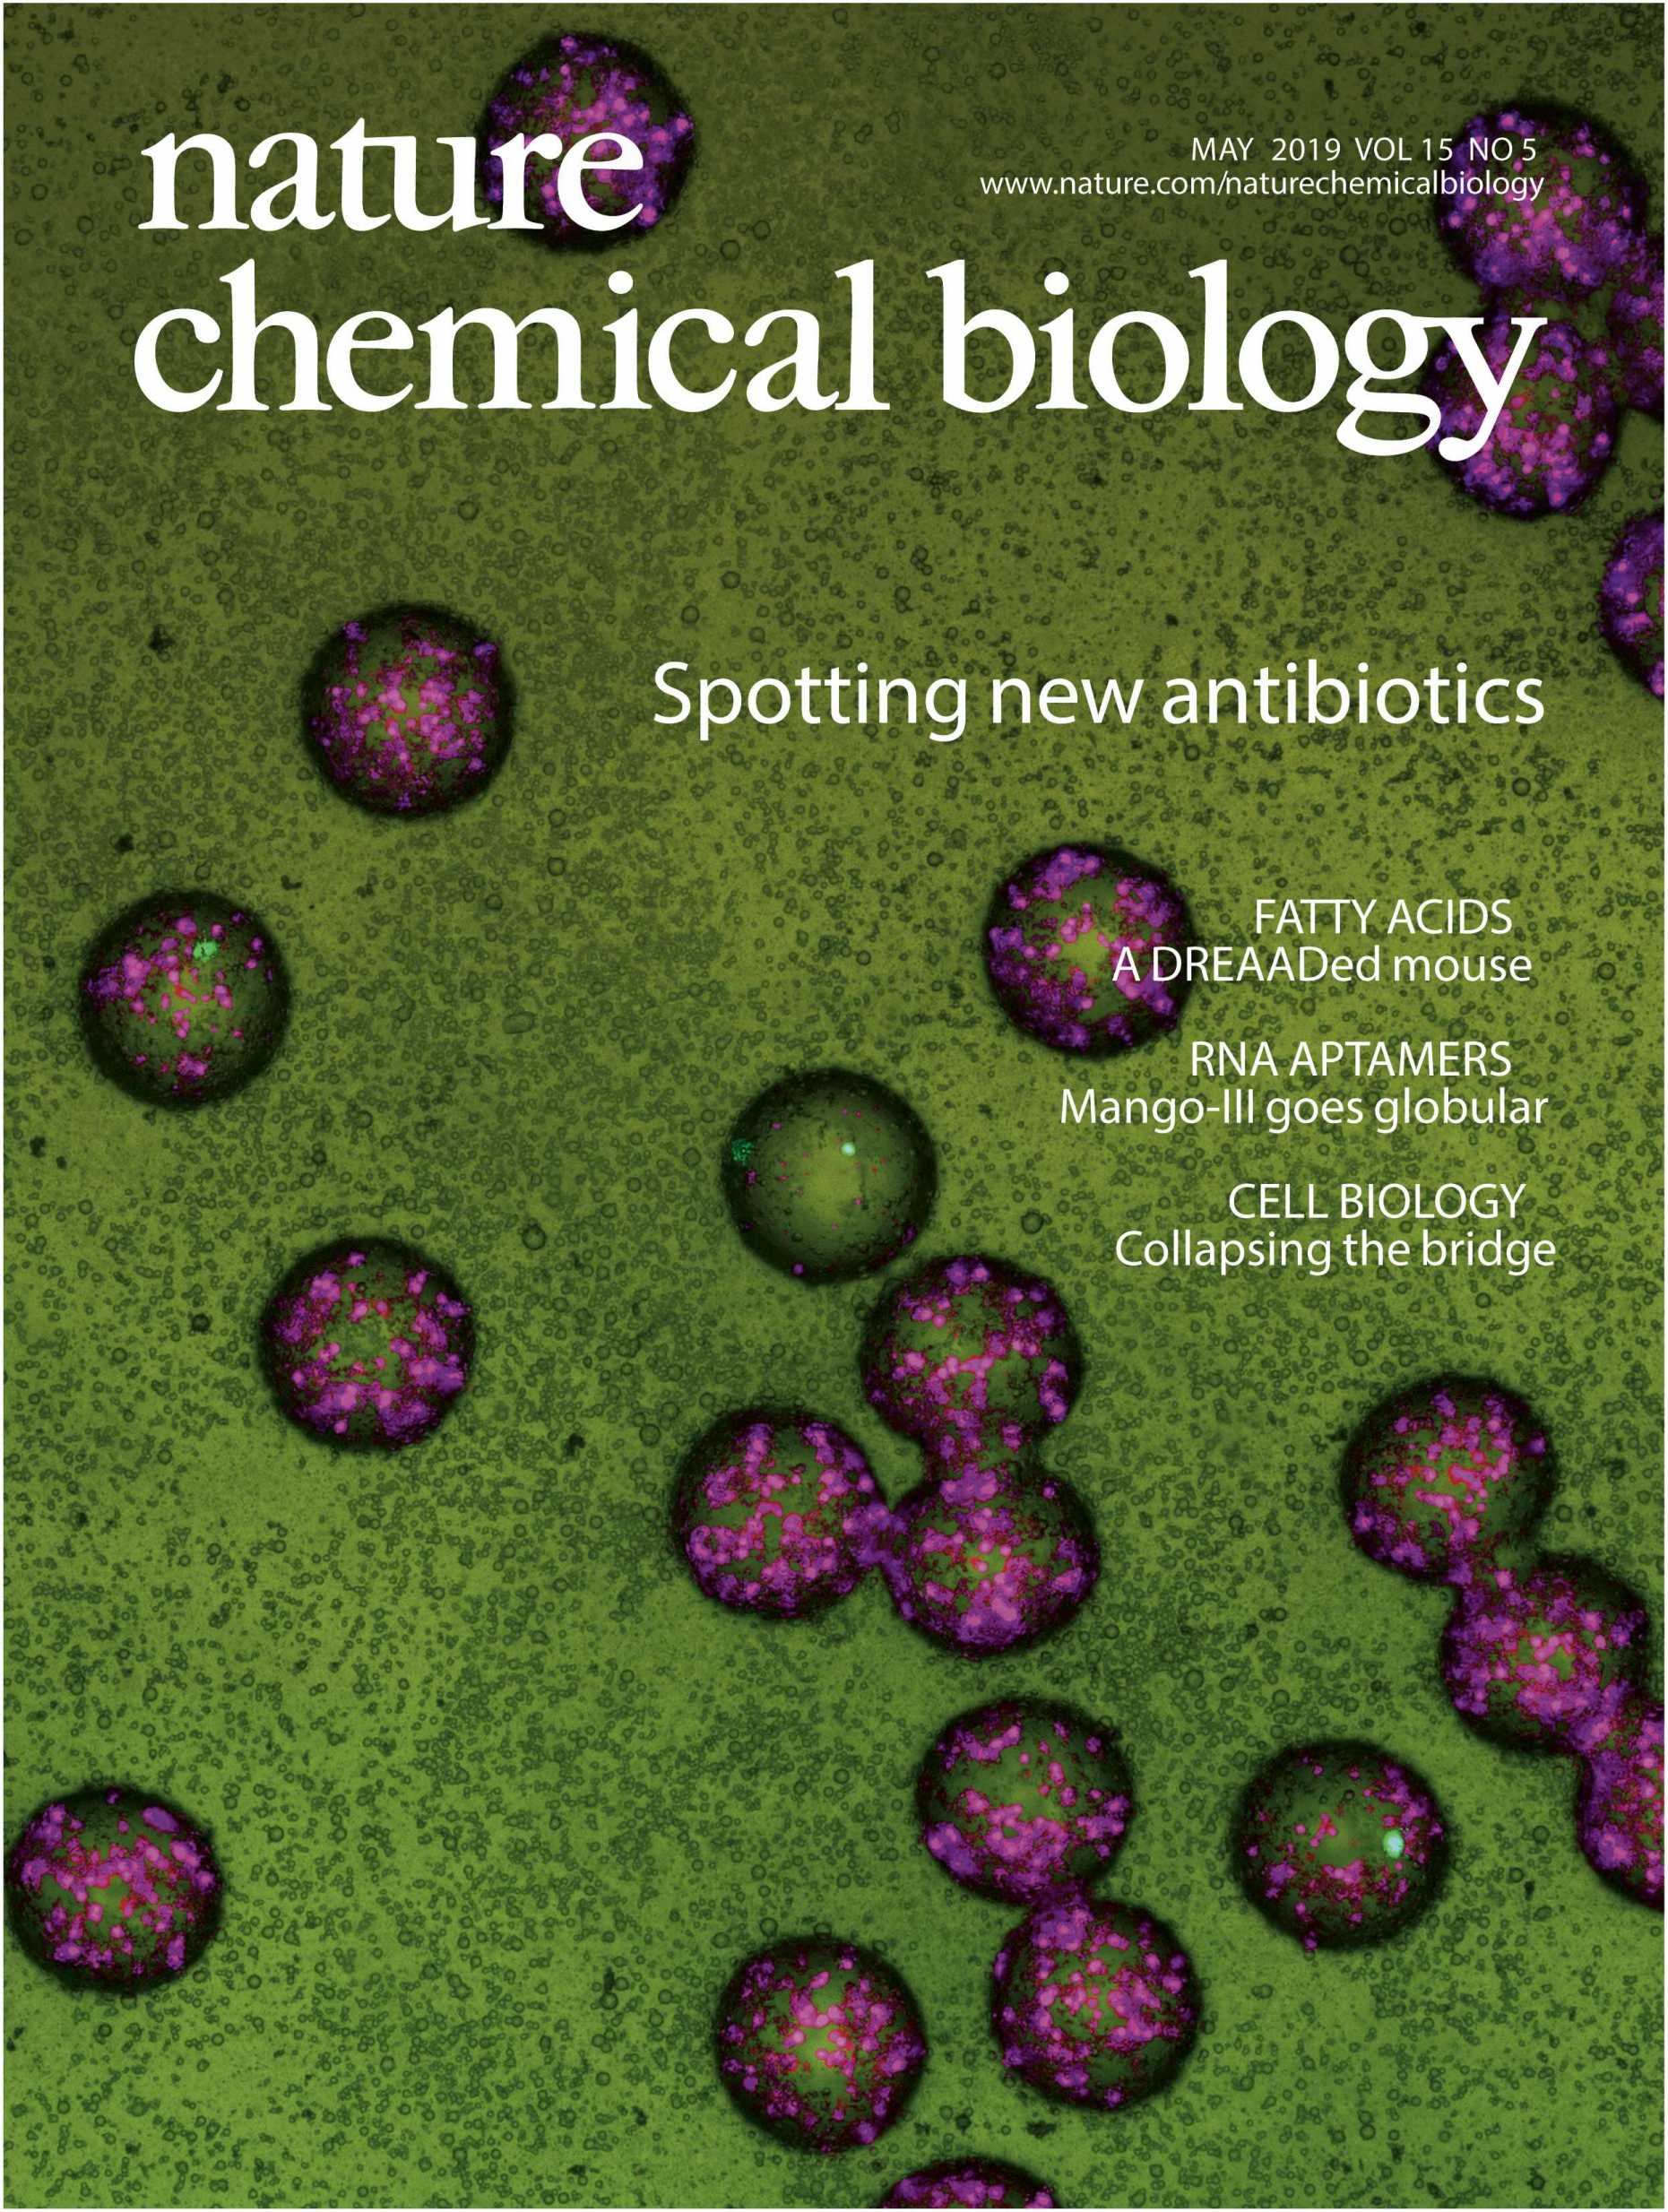 NatureChemicalBiology_cover_May2019